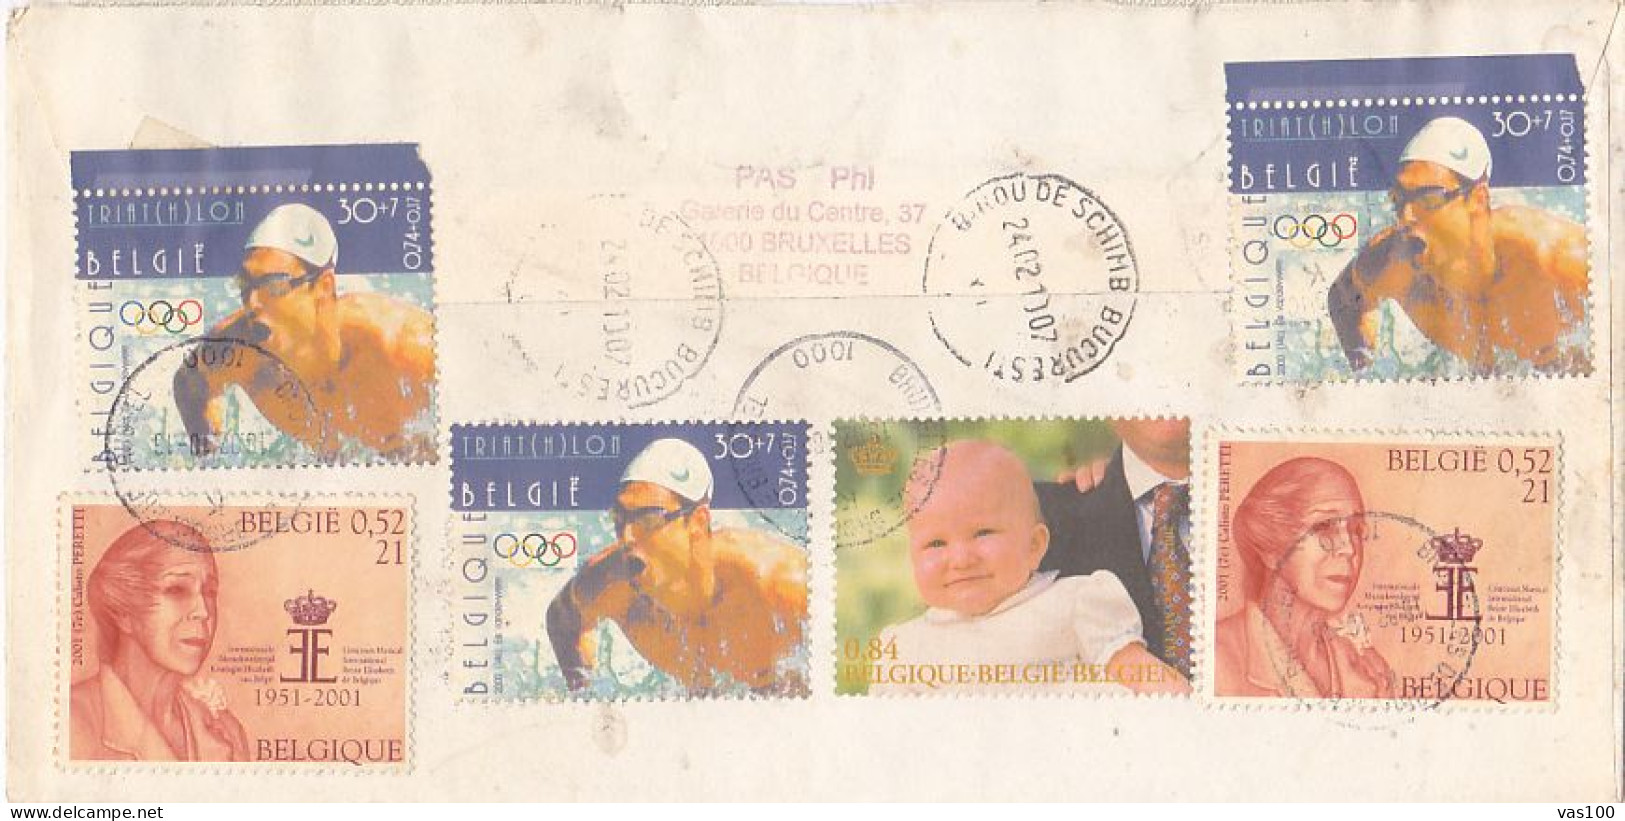 TRANSPORTS MINISTRIES CONFERENCE, SWIMMING, MUSIC, CHILDREN, STAMPS ON REGISTERED COVER, 2010, BELGIUM - Brieven En Documenten